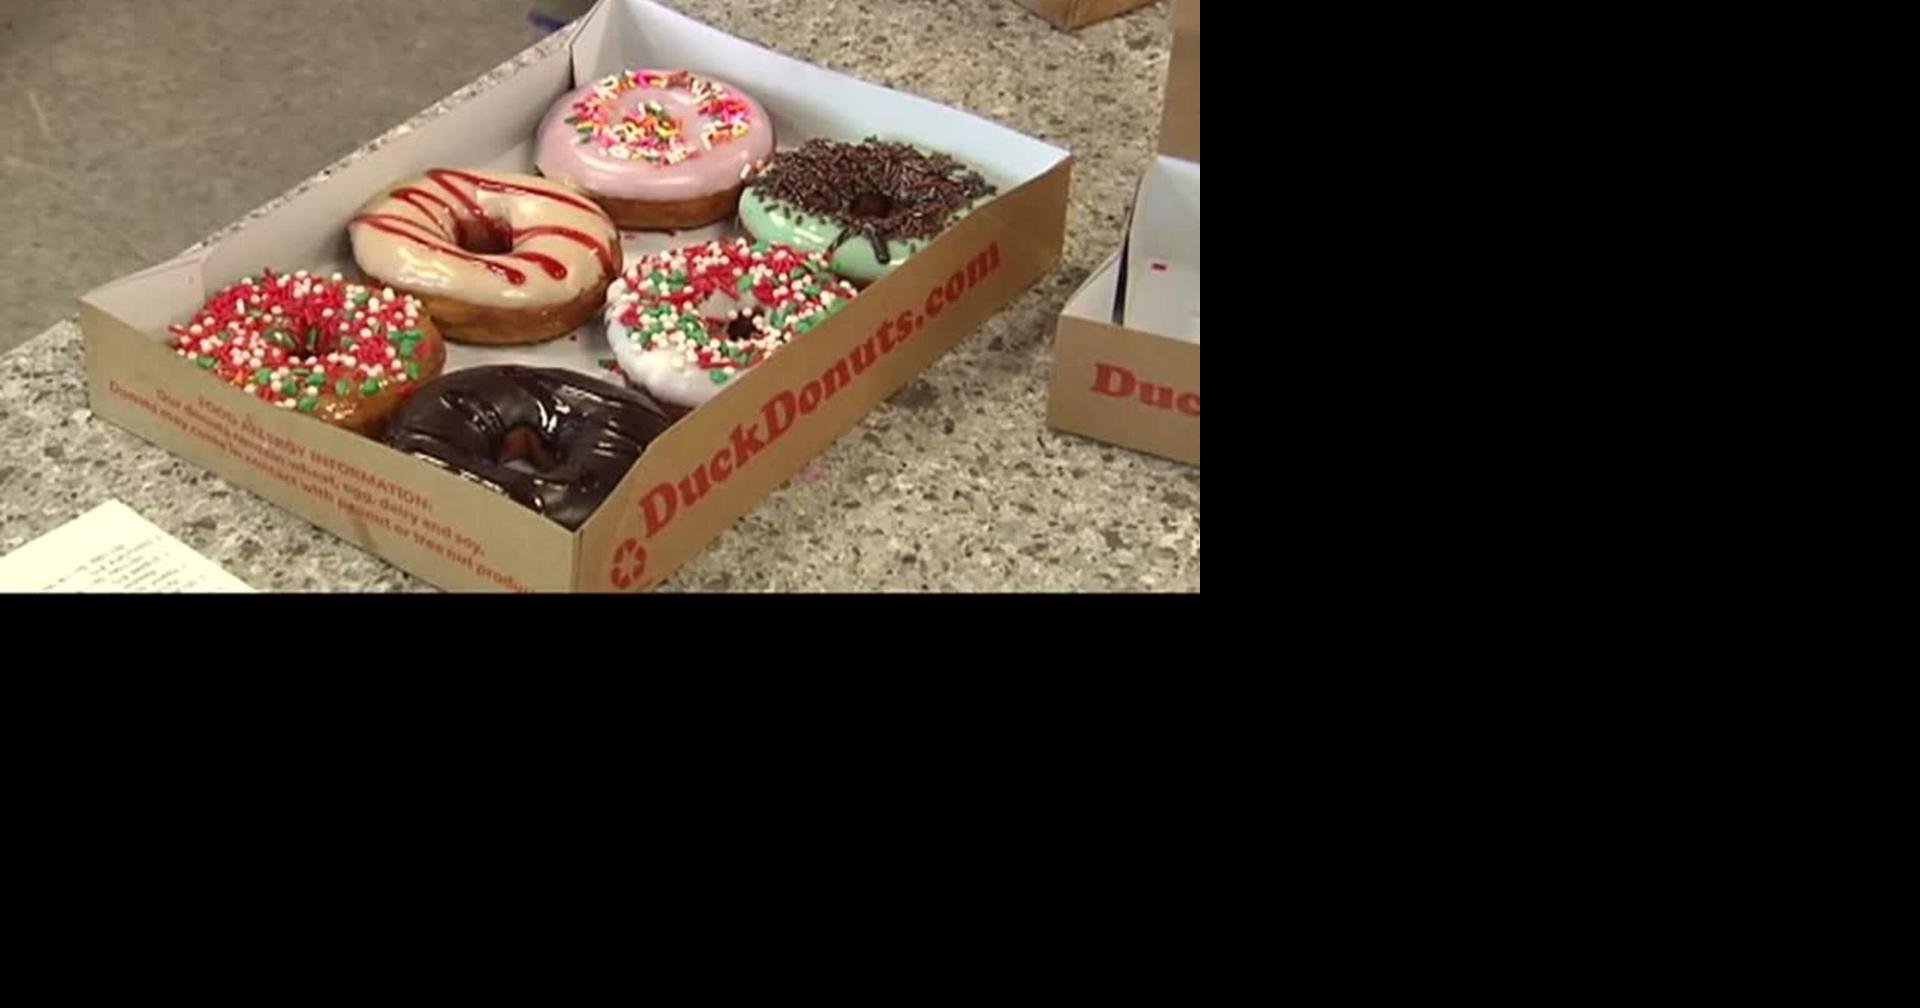 Duck Donuts bringing specialty, made-to-order doughnuts to 2nd Lehigh ...